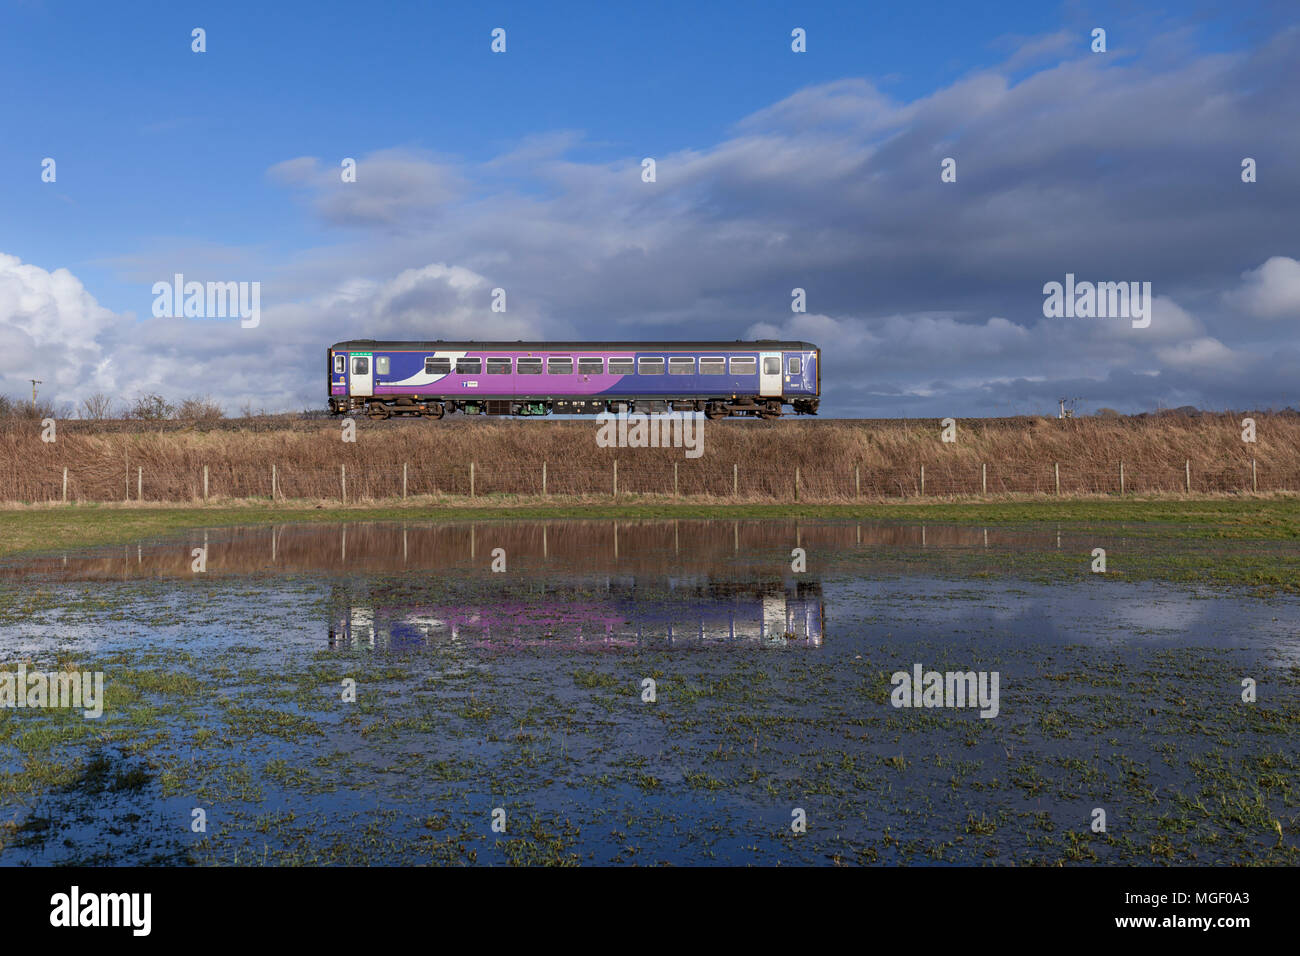 A Northern rail class 153 sprinter train reflected in a large puddle at Blackdykes (between Arnside & Silverdale) on the Cumbrian coast railway line Stock Photo